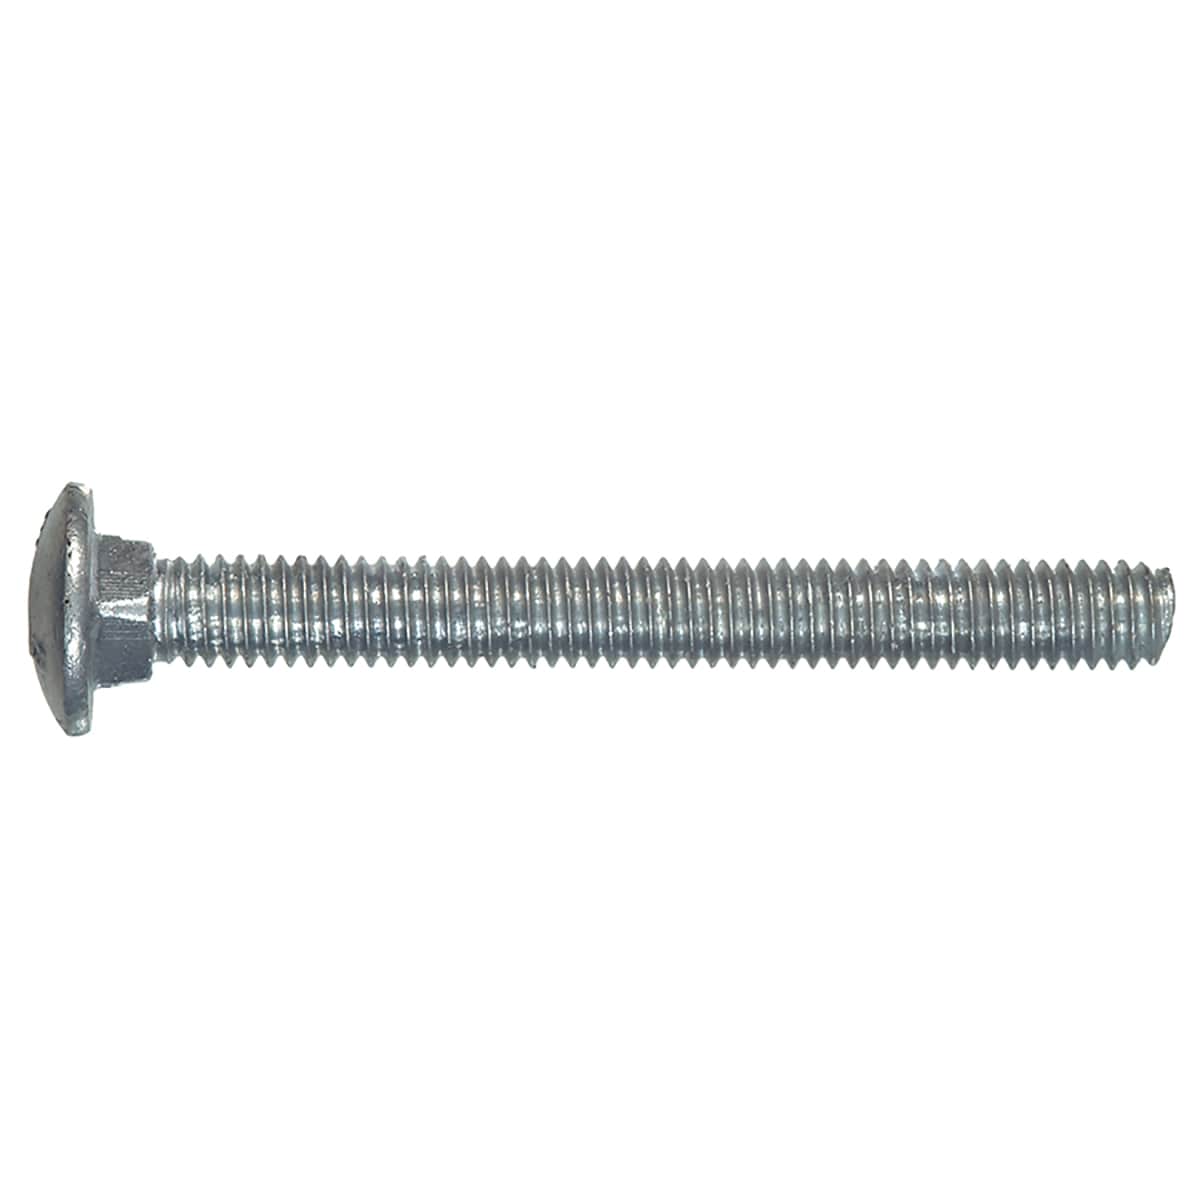 3/8-16 x 6" Carriage Bolts and Nuts Hot Dip Galvanized Quantity 250 